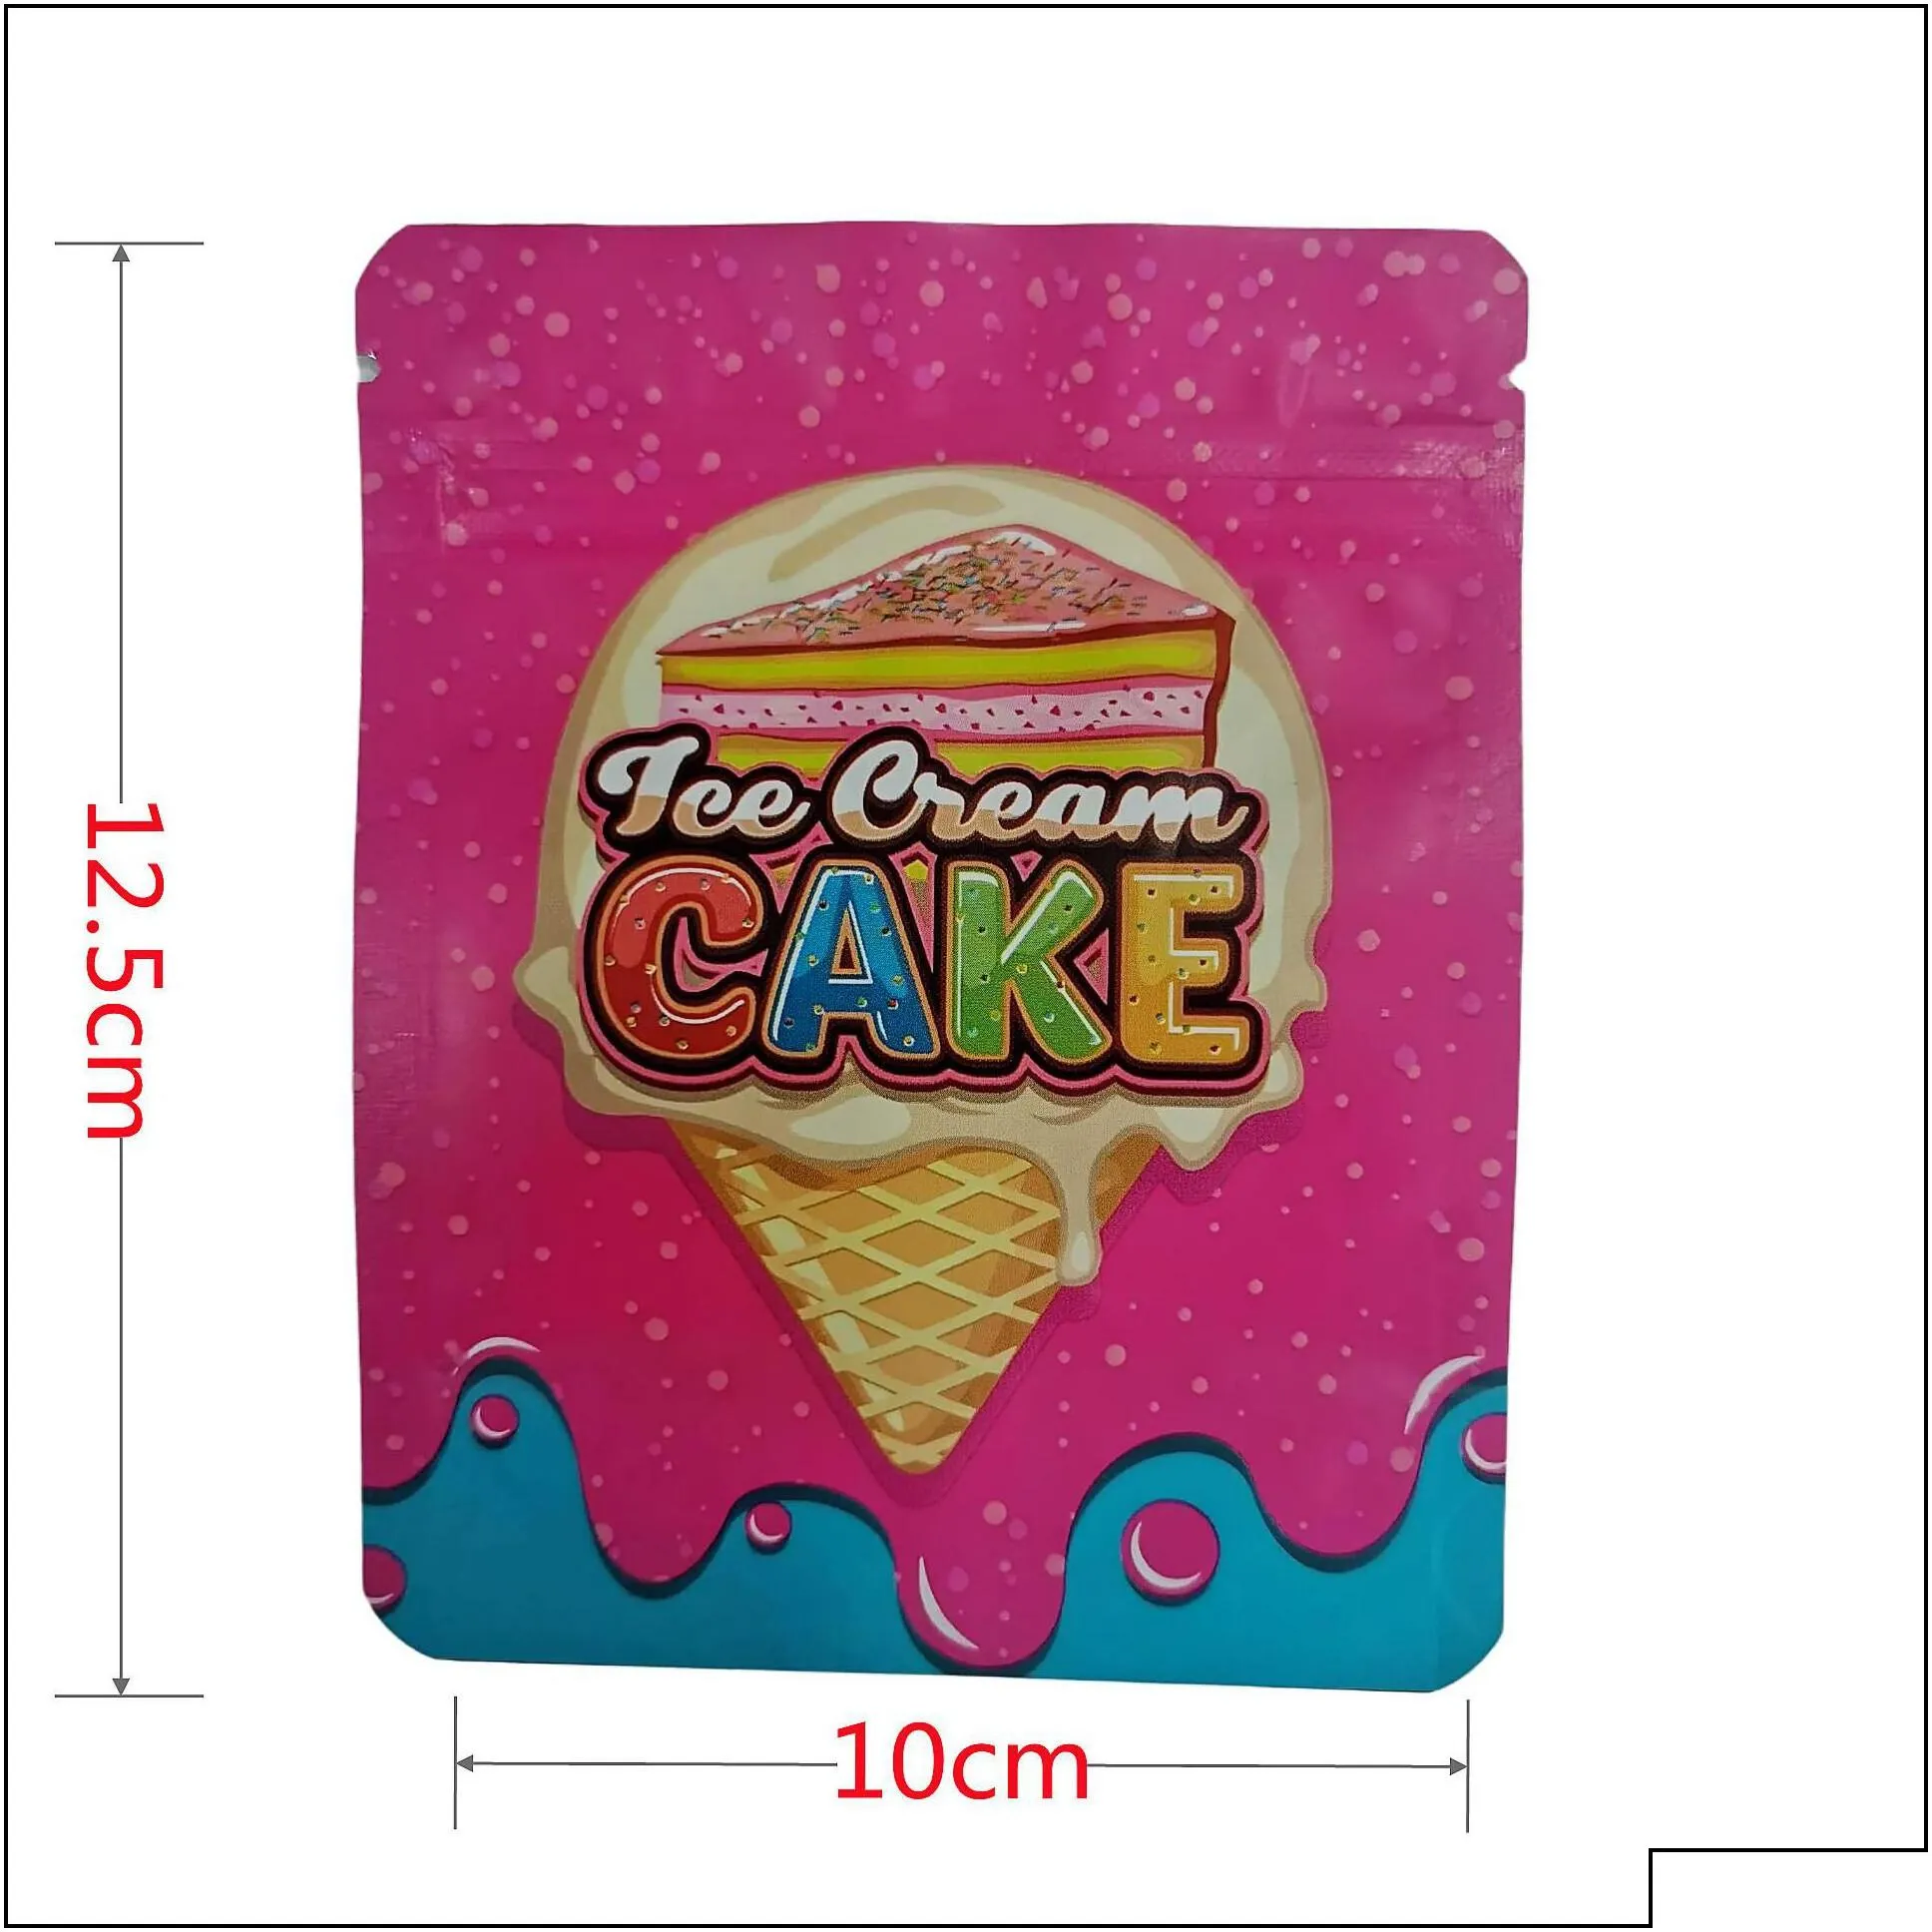 wholesale packing bags 16design ice cream cake mylar bag gelato 3.5 gram zipper package smell proof container edibles dry herb flowers jllike d